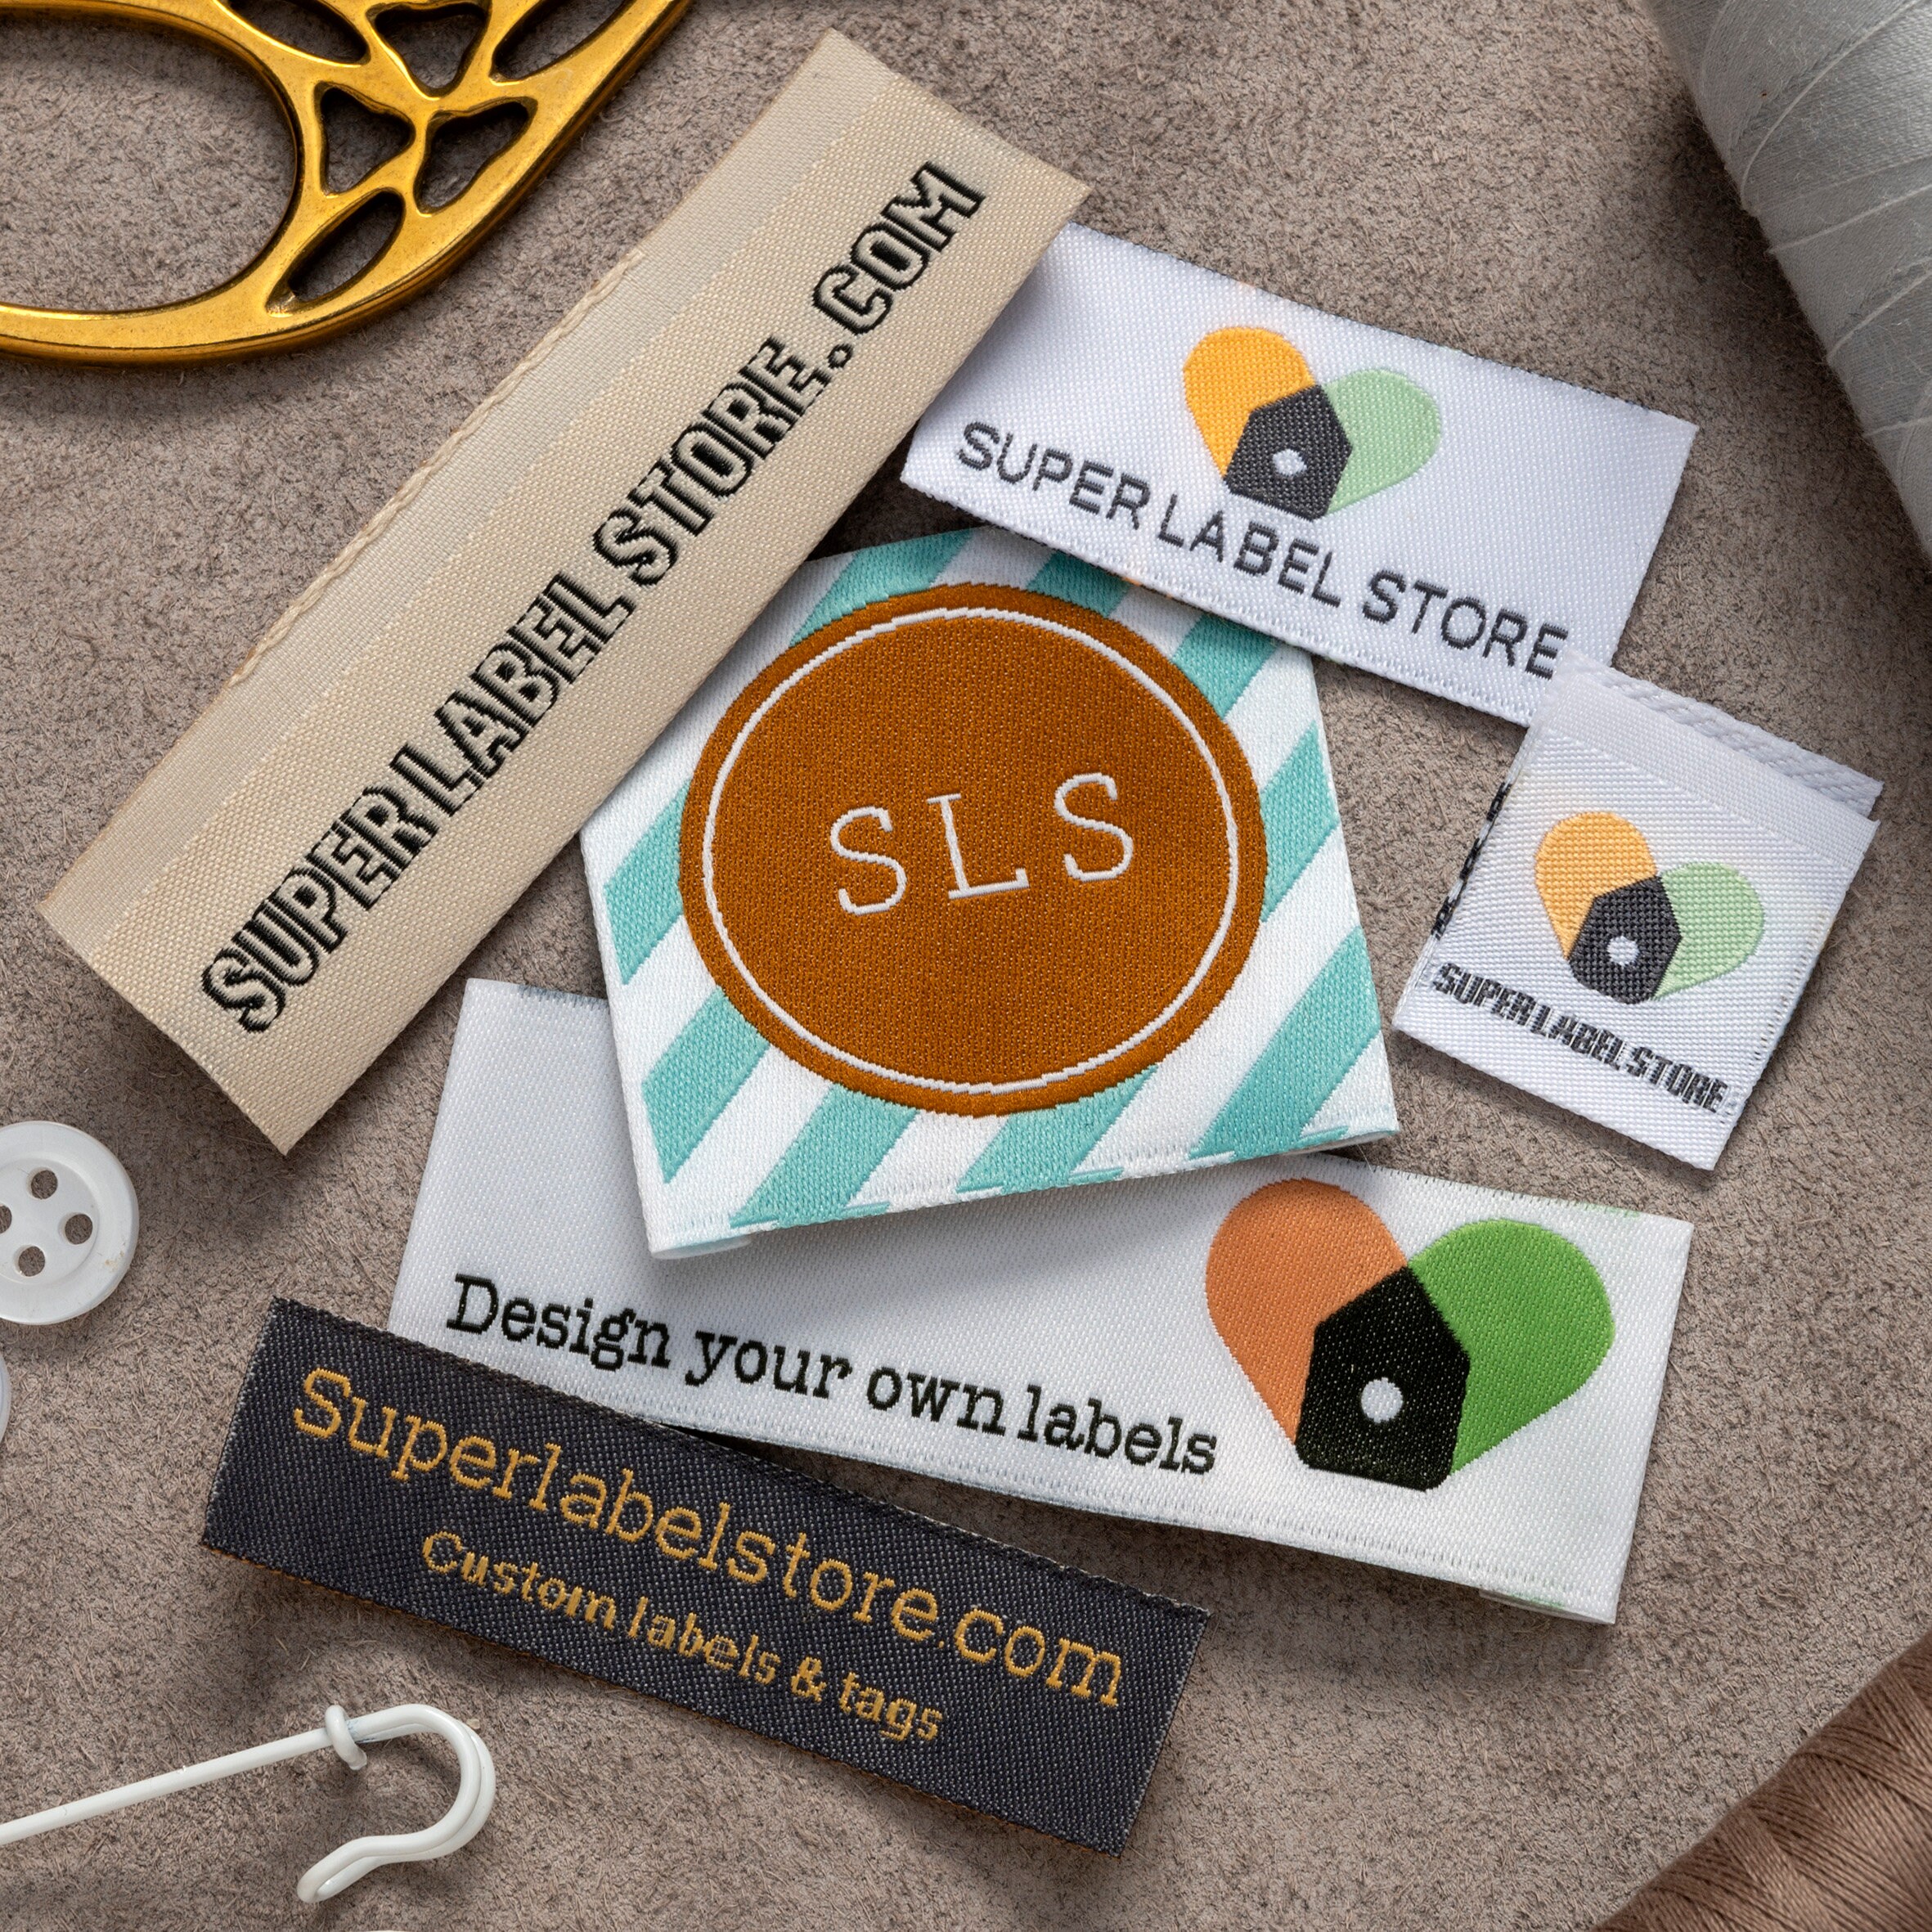 Custom Clothing Labels & Tags » Super Label Store